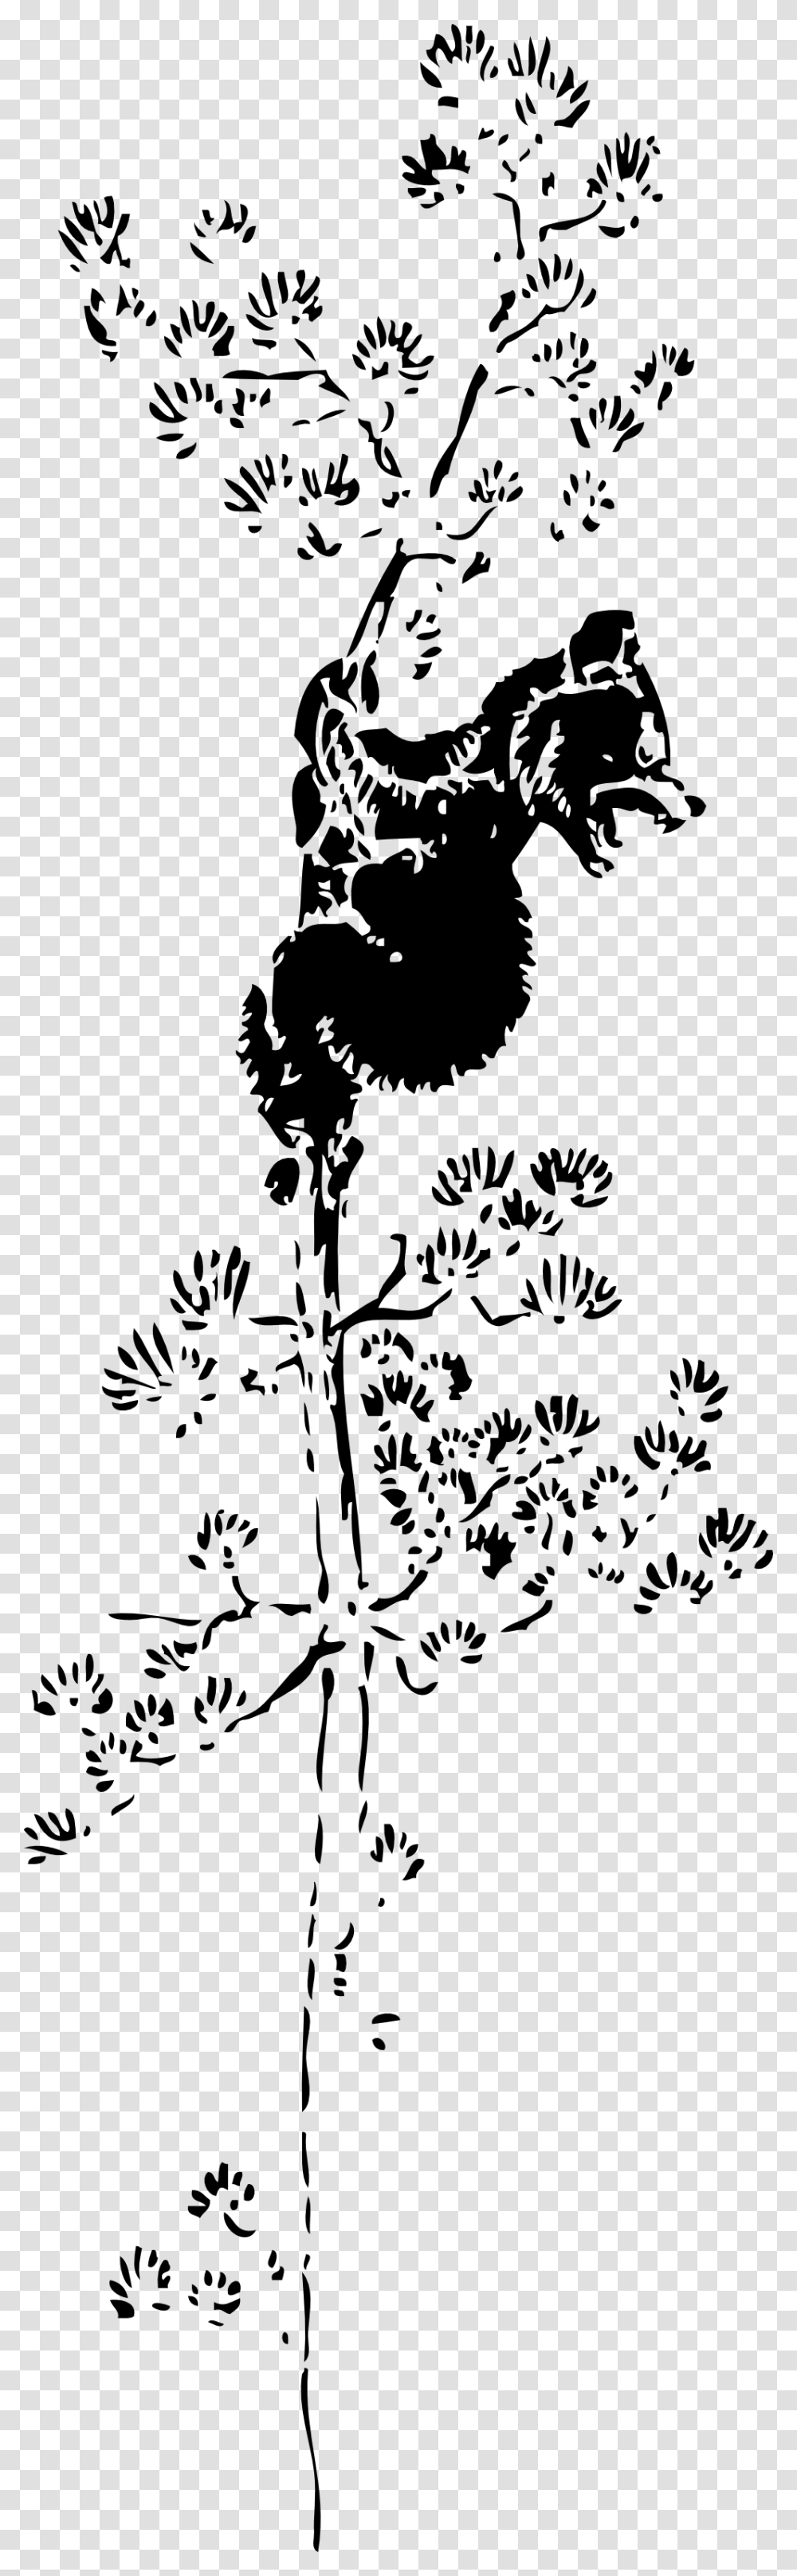 Bear Cub In Tree Silhouette, Stencil, Floral Design Transparent Png